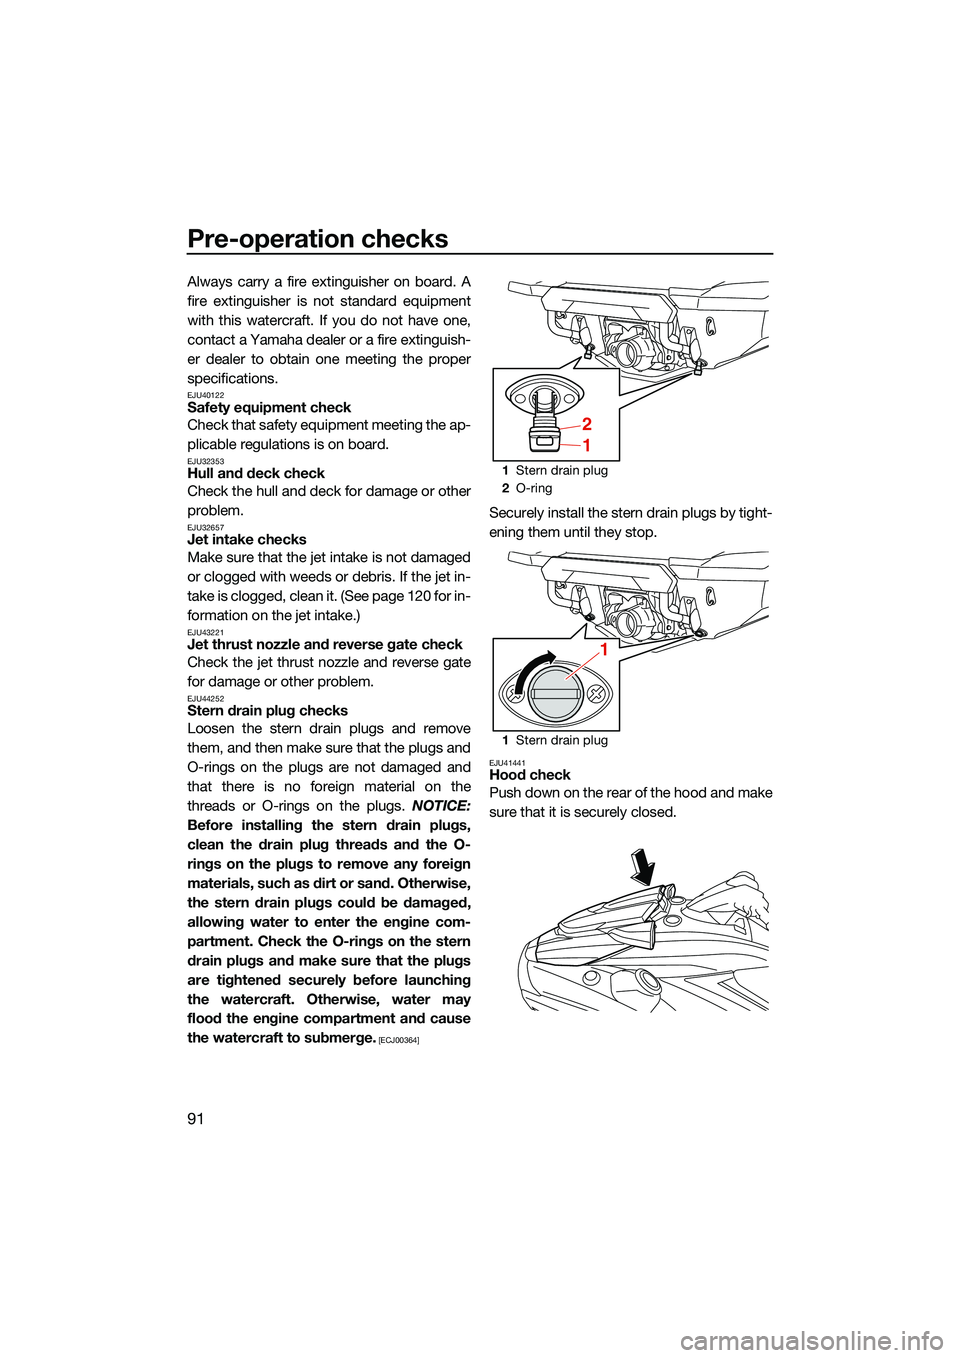 YAMAHA FX HO CRUISER 2022  Owners Manual Pre-operation checks
91
Always carry a fire extinguisher on board. A
fire extinguisher is not standard equipment
with this watercraft. If you do not have one,
contact a Yamaha dealer or a fire extingu